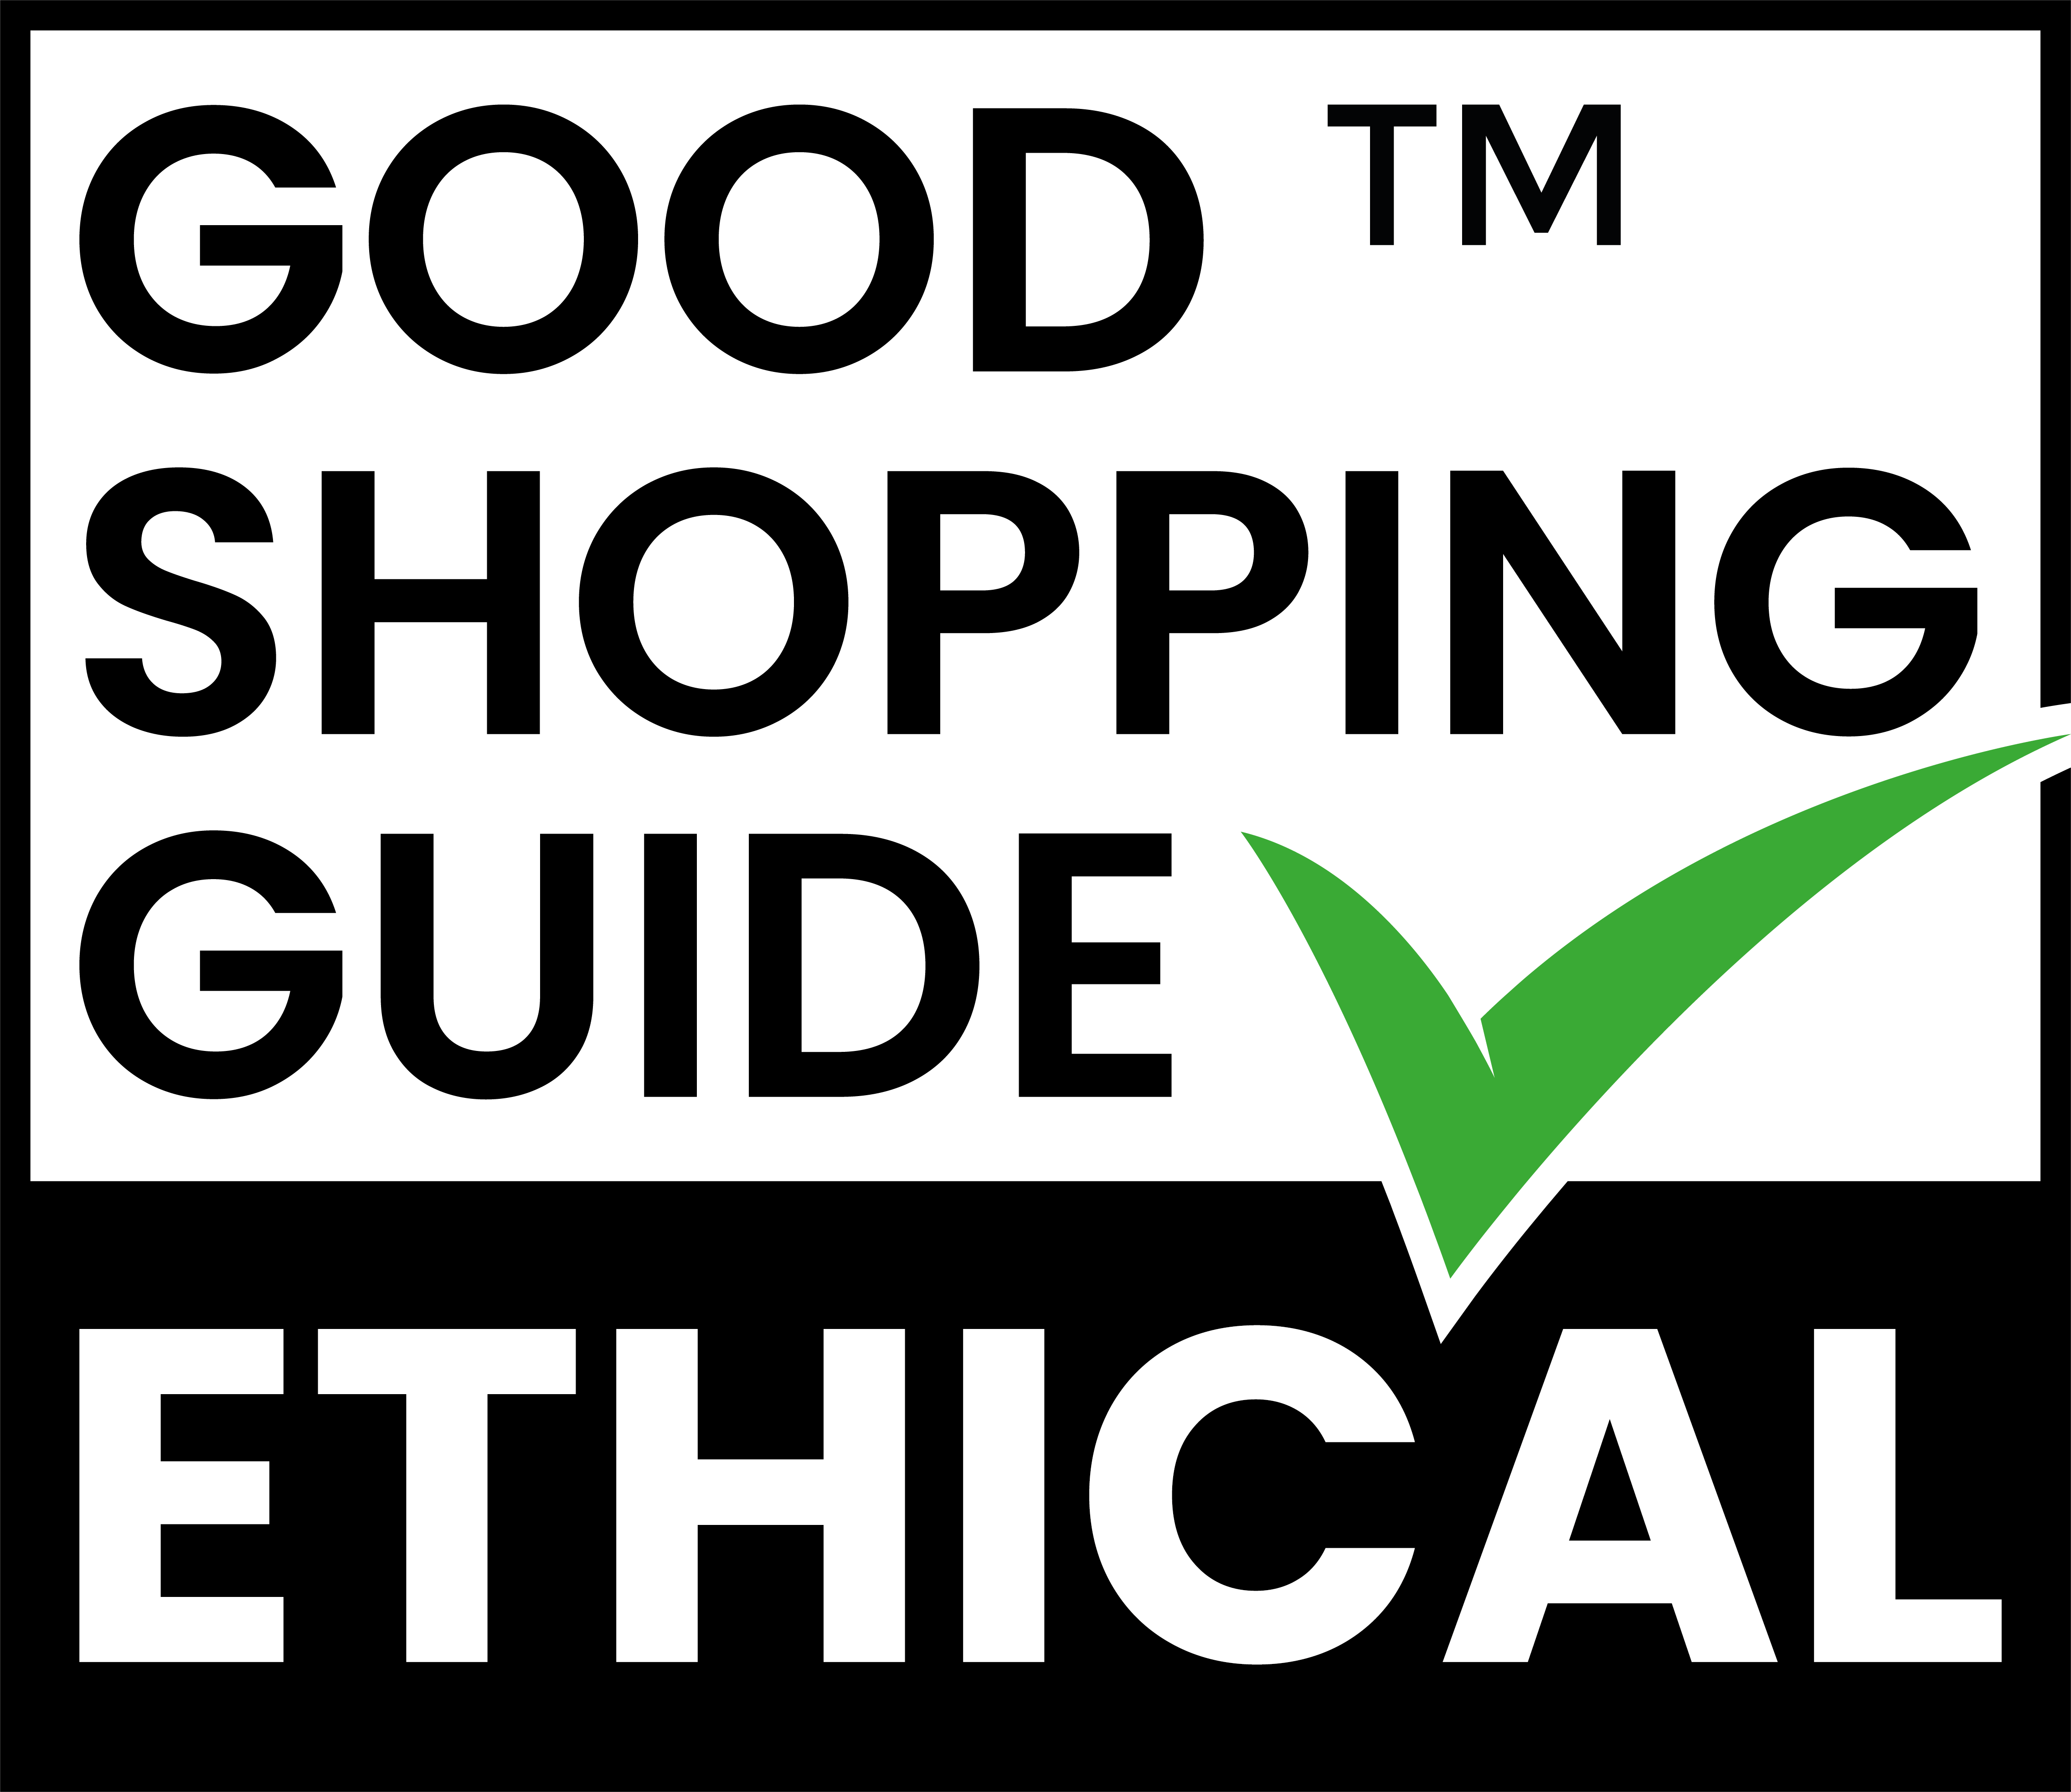 How ethical is Nike?